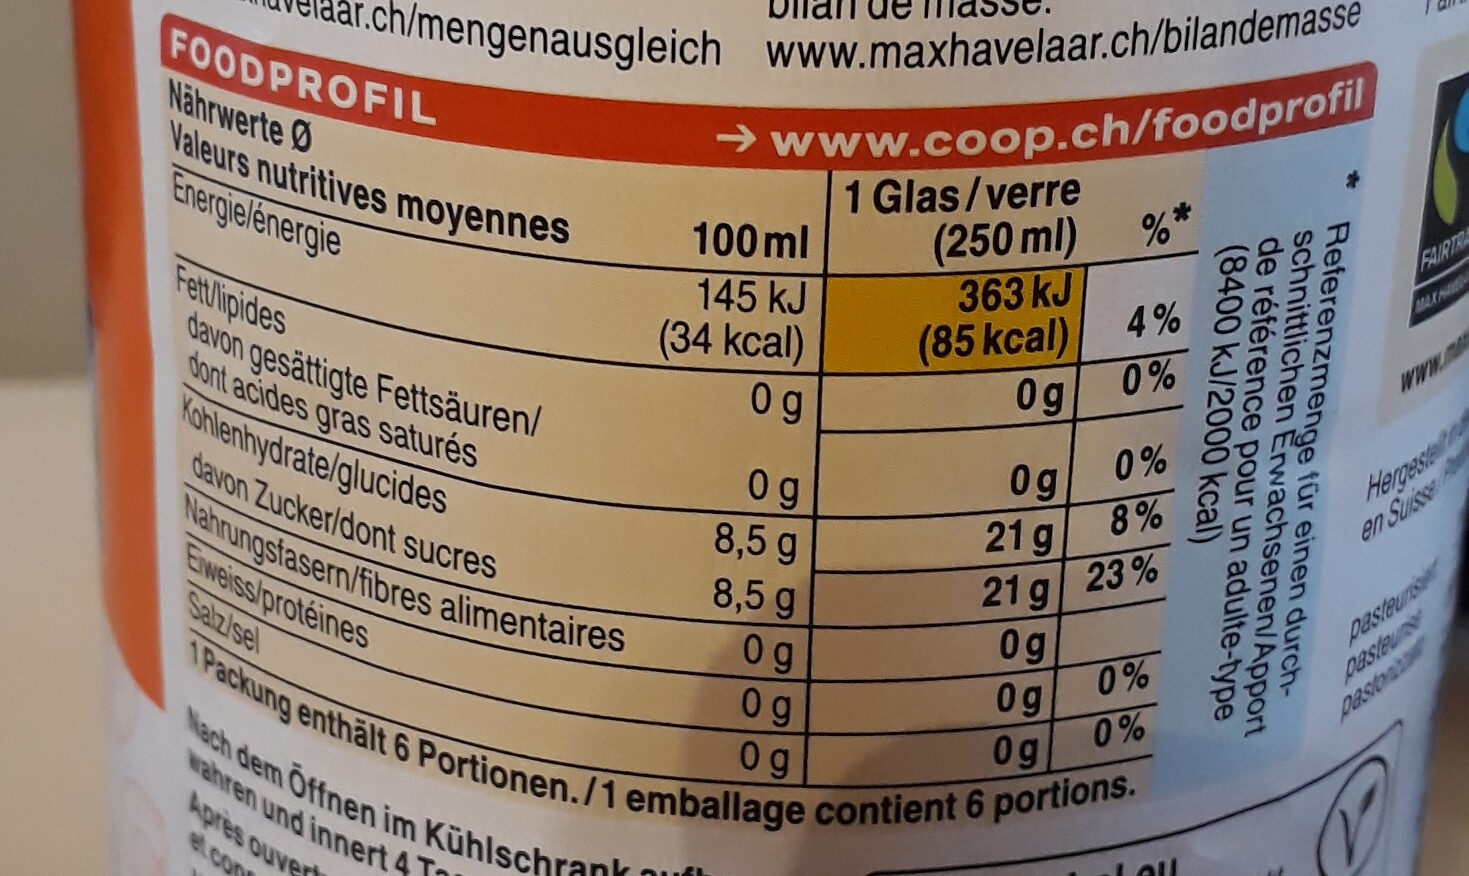 Thé froid pêche - Nutrition facts - fr